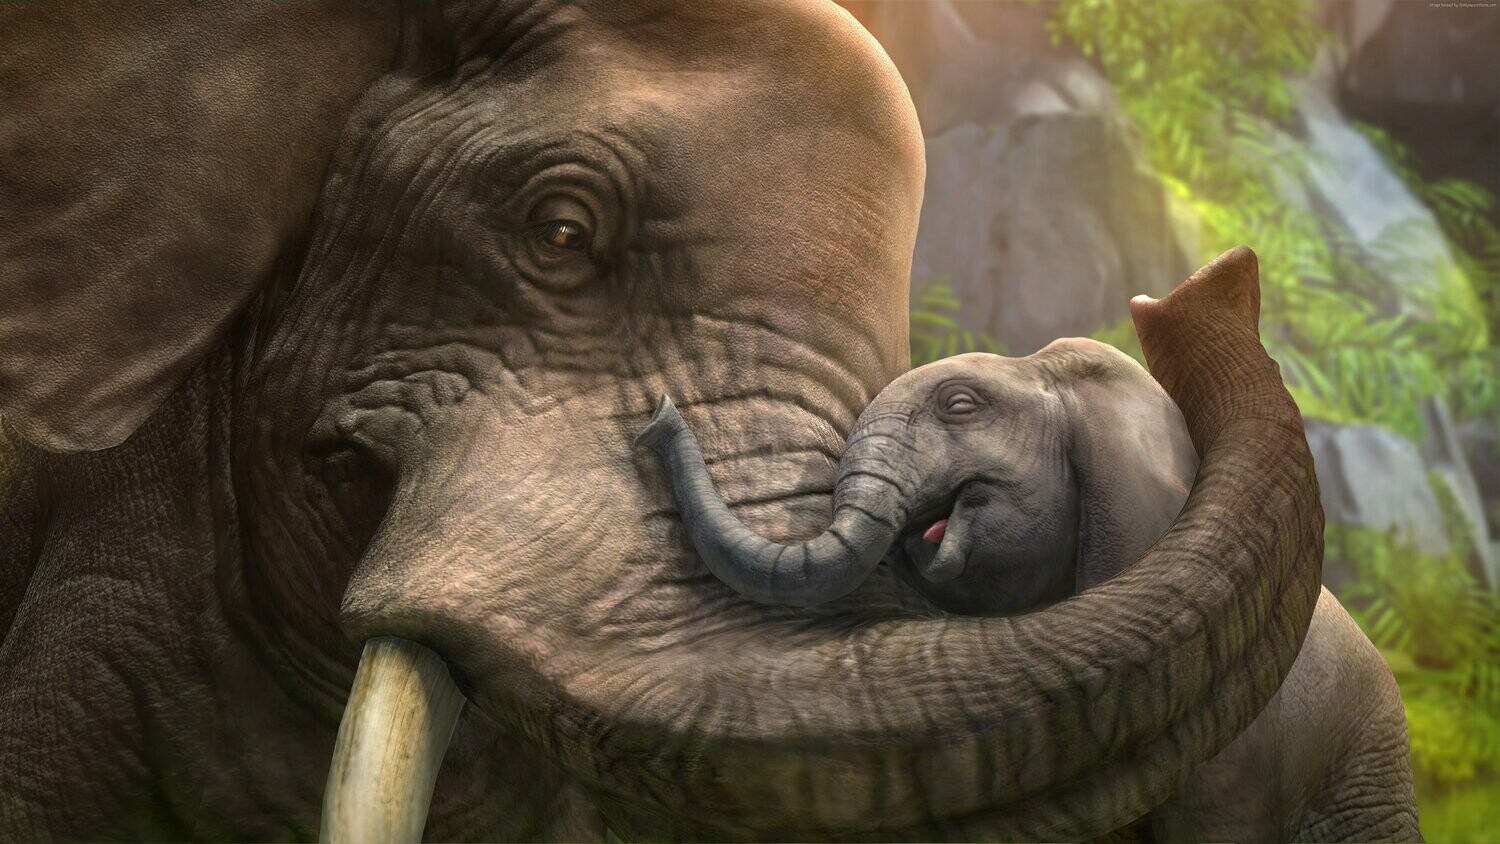 Elephants Cuddling - Full Drill Diamond Painting - Specially ordered for you. Delivery is approximately 4 - 6 weeks.